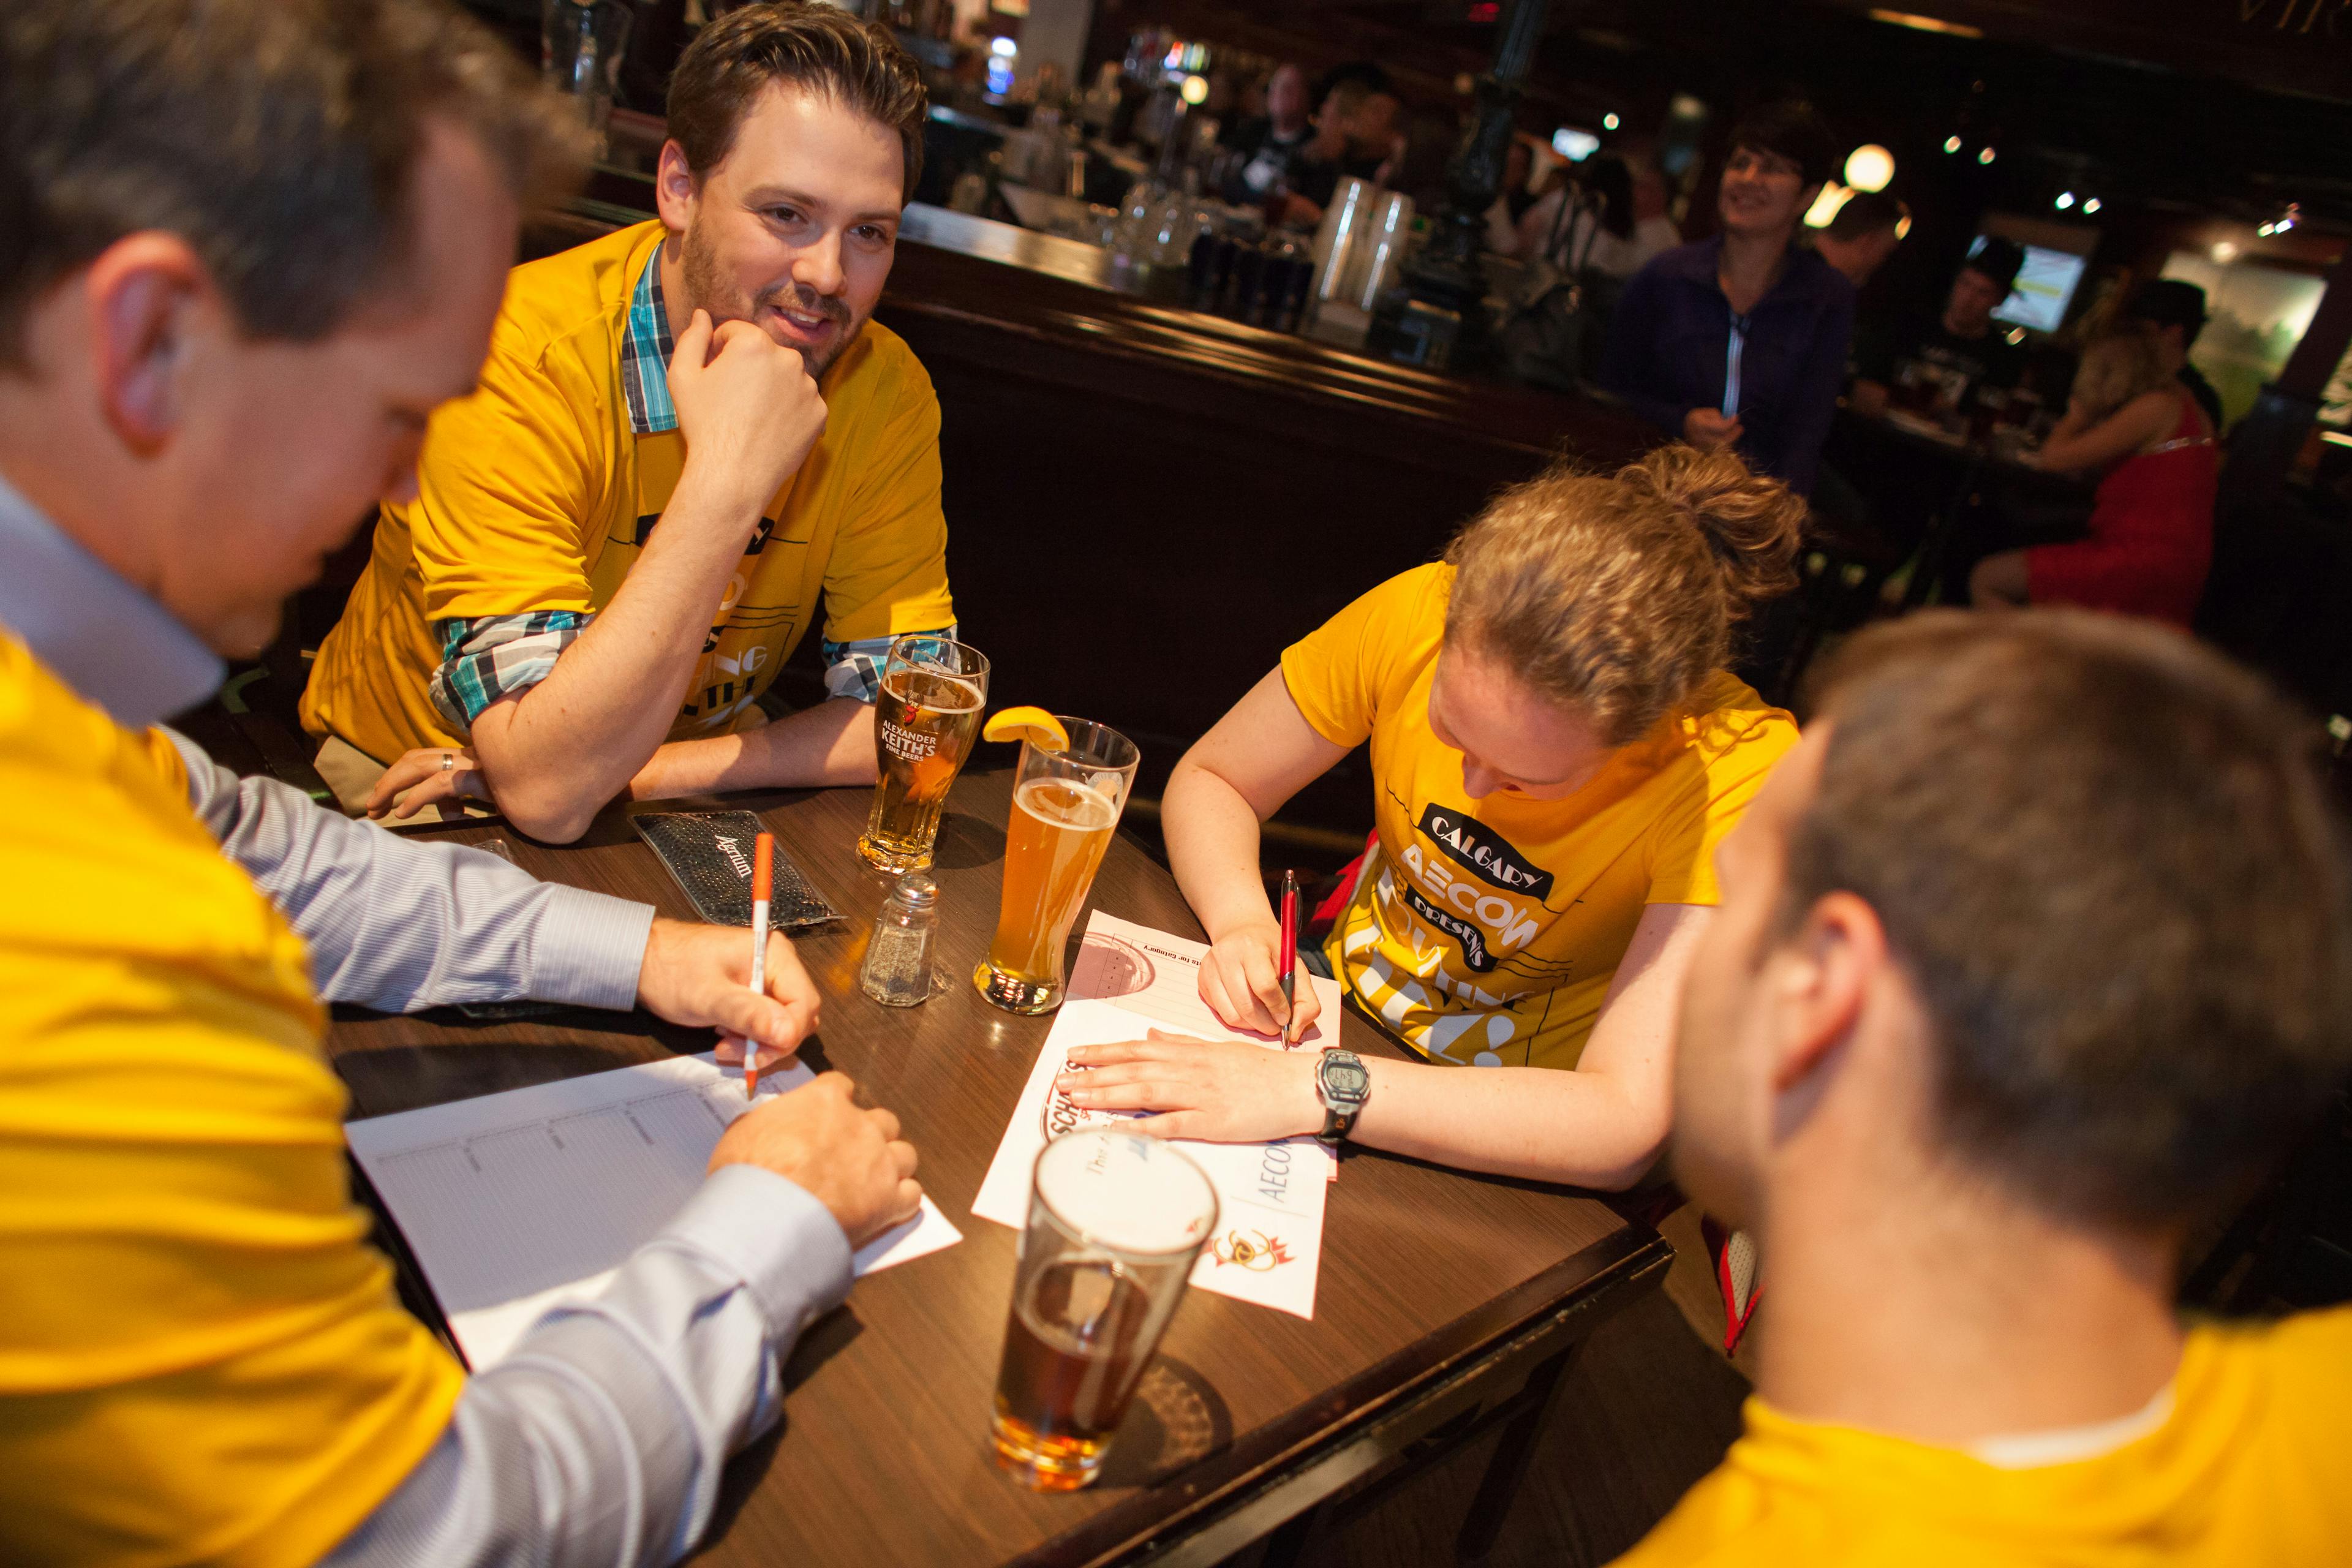 A group of four people in yellow shirts, playing trivia